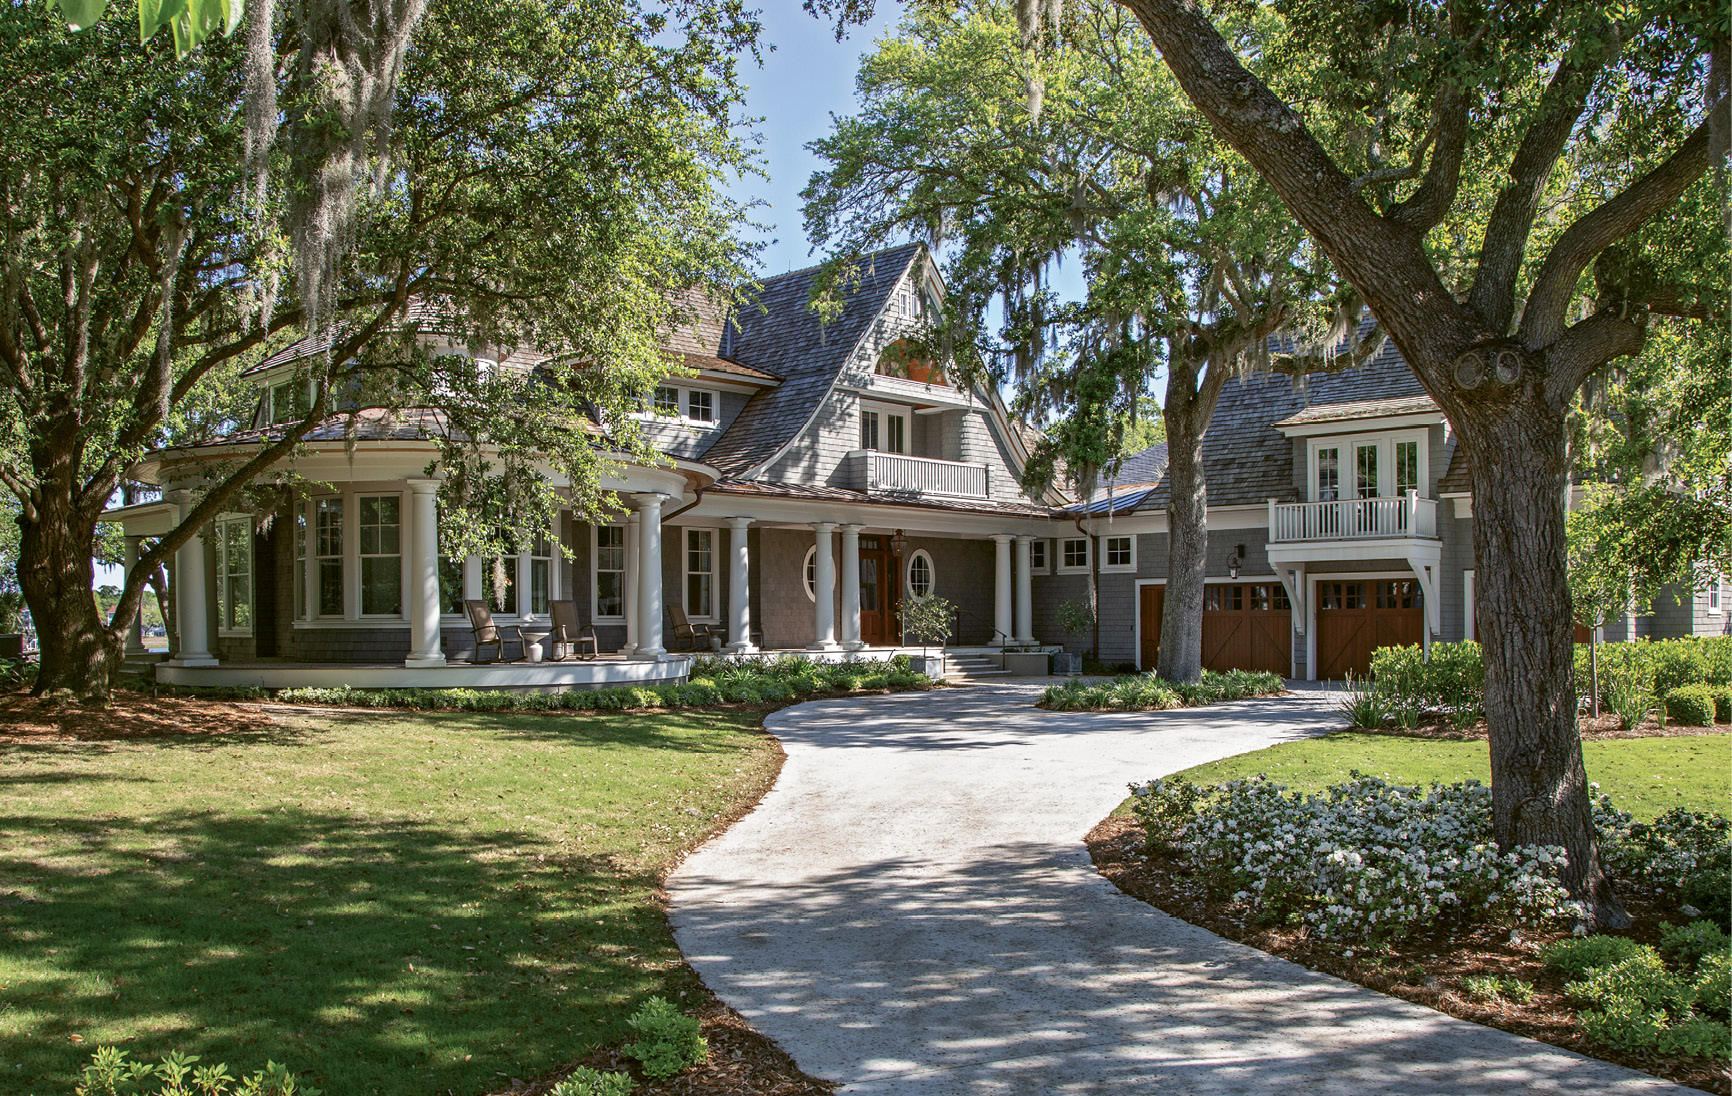 MADE IN THE SHADE: With “the Kiawah look” in mind, Suzie and Mark Dajani built their dream home—a blend of Northeastern shingle-style architecture with classic Southern touches—on James Island.